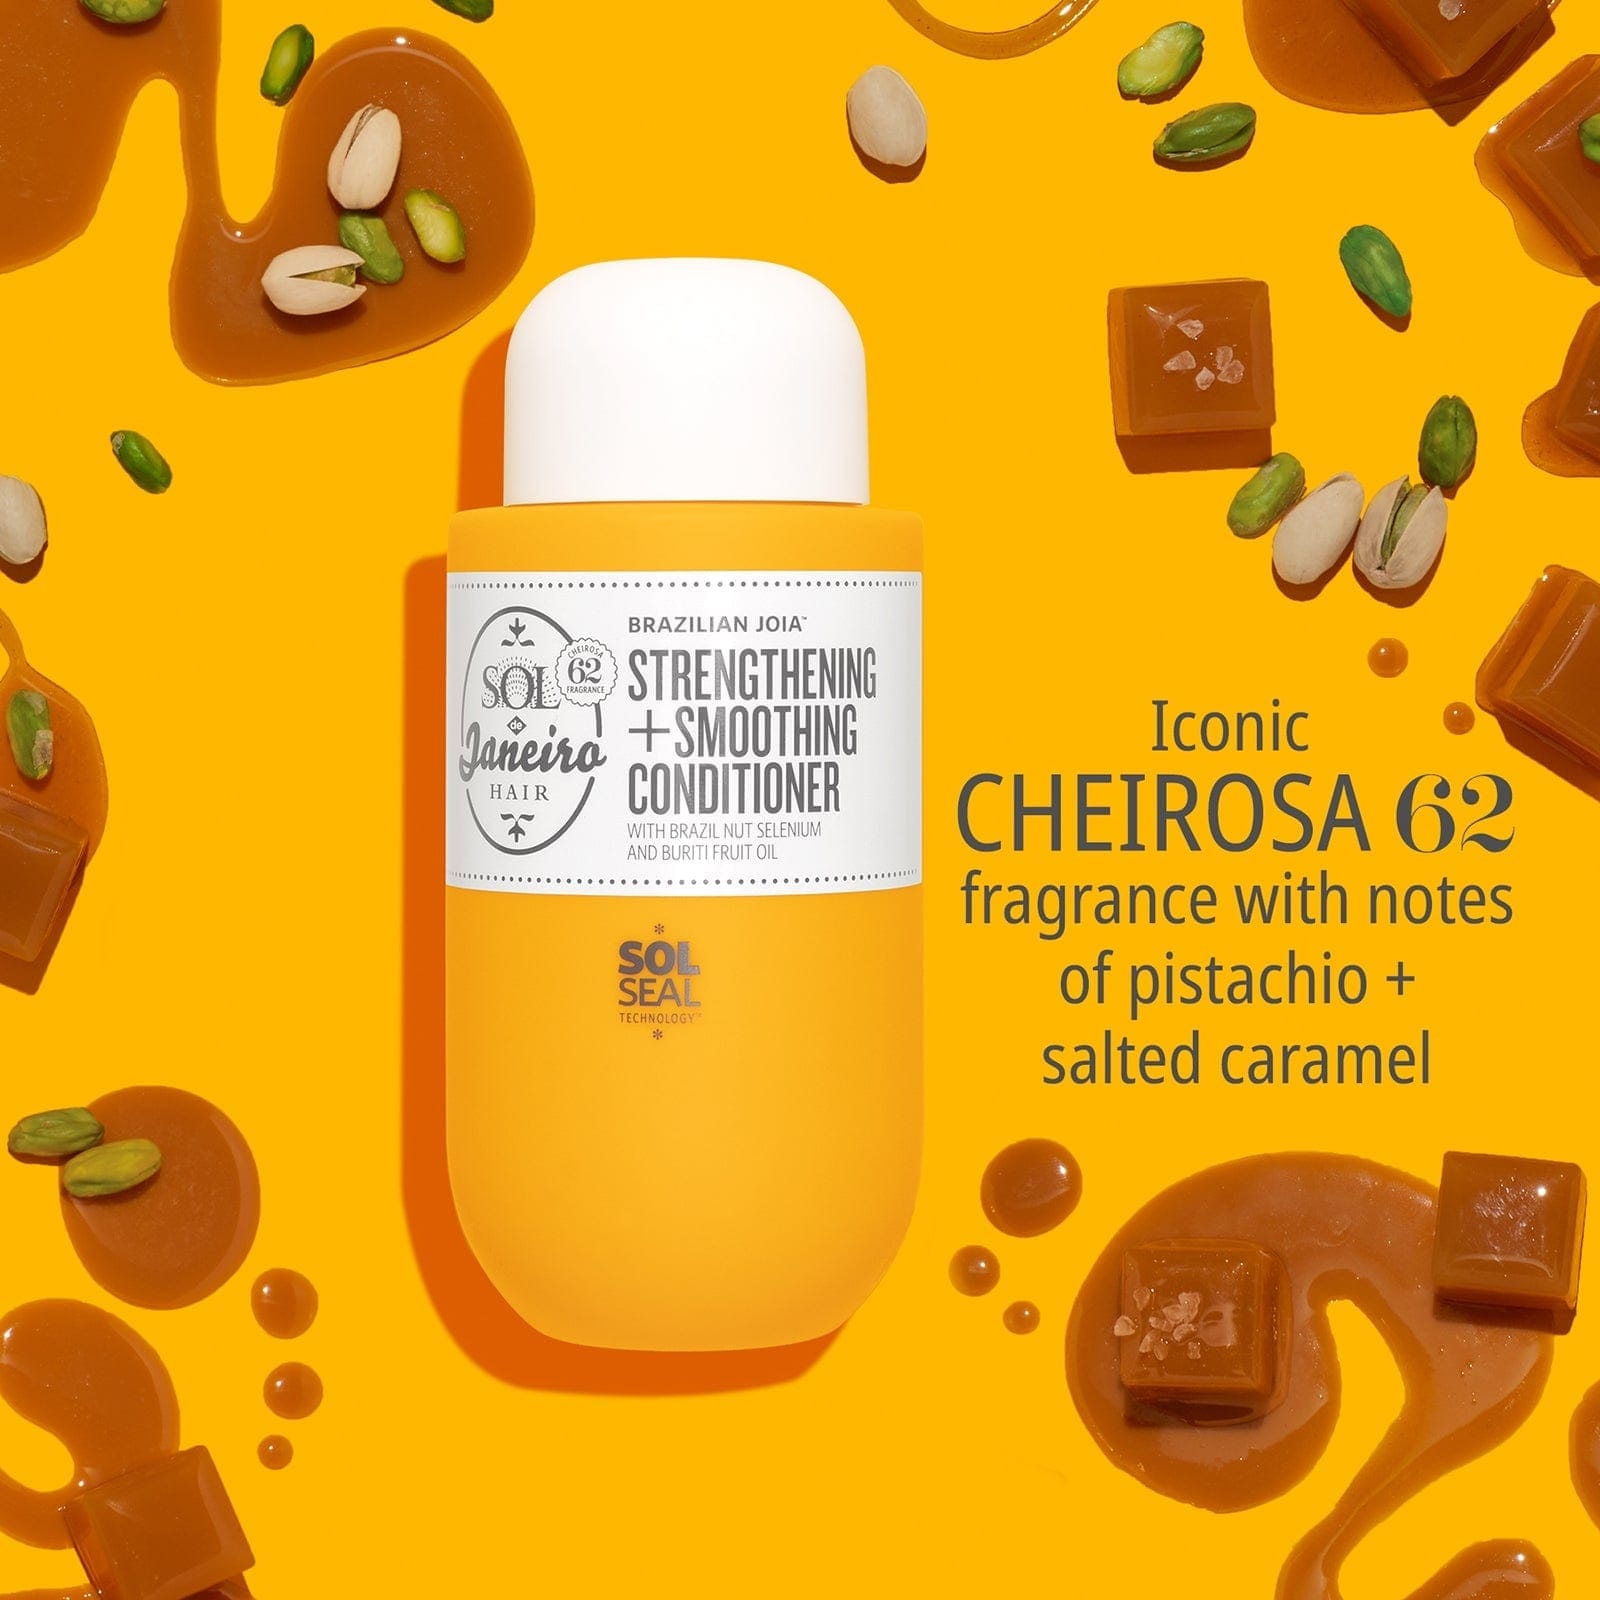 Iconic cheirosa 62 fragrances with notes of pistachio + salted caramel